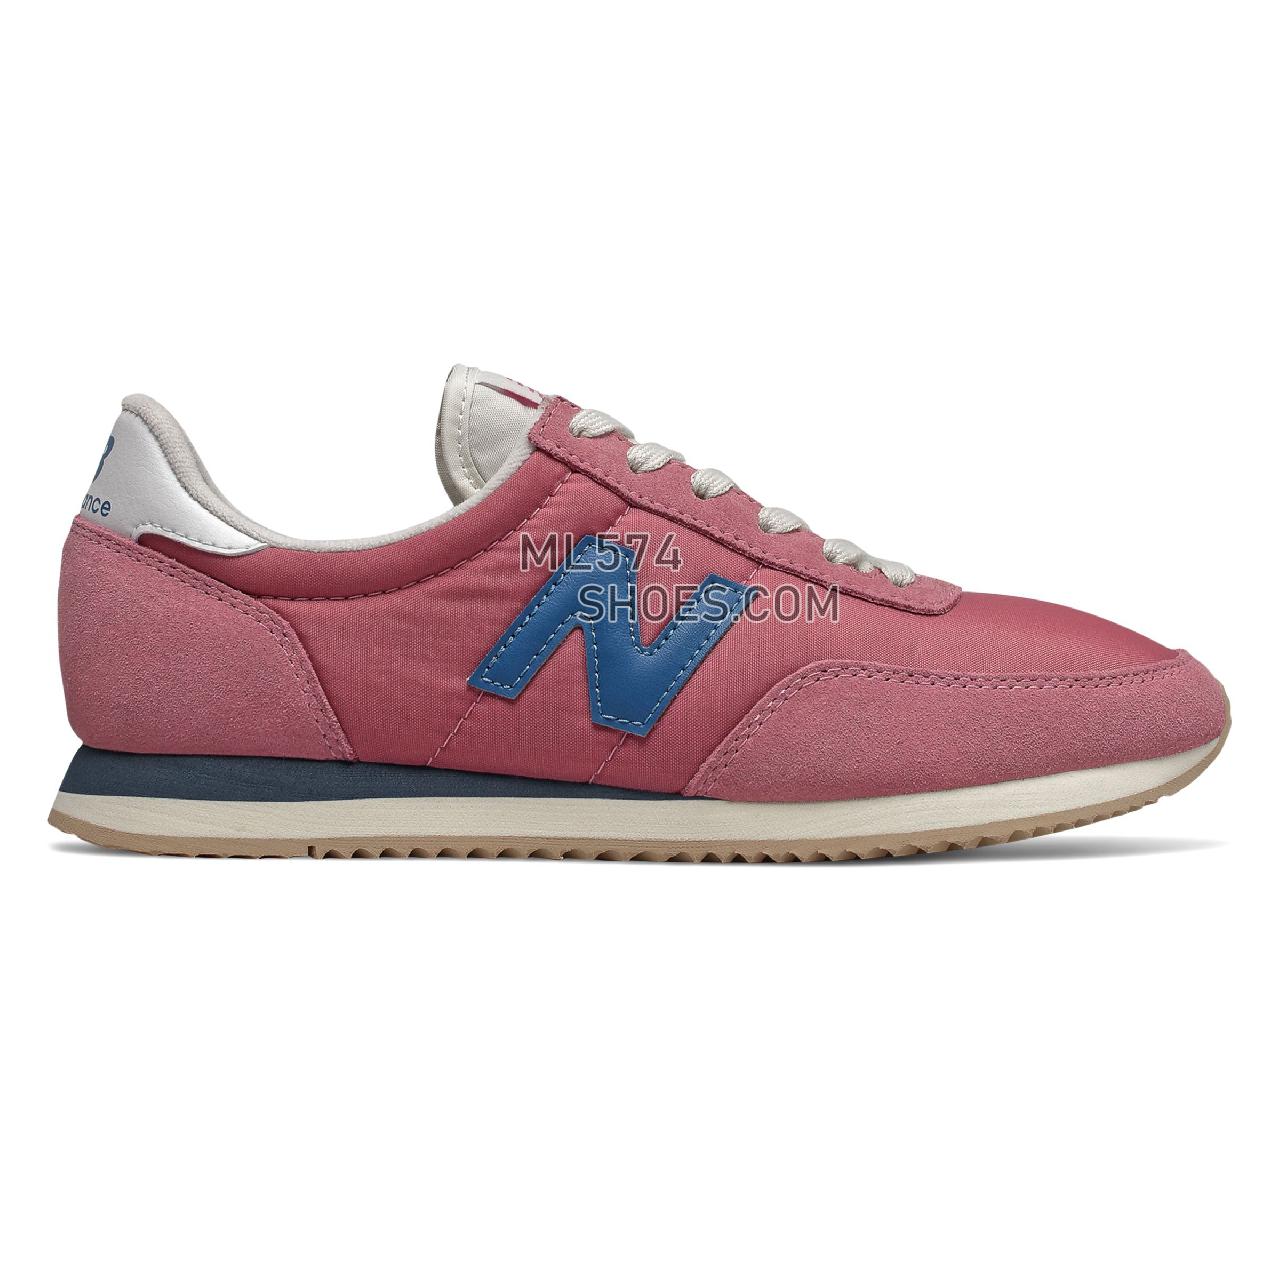 New Balance 720 - Women's Classic Sneakers - Madder Rose with Mako Blue - WL720BA